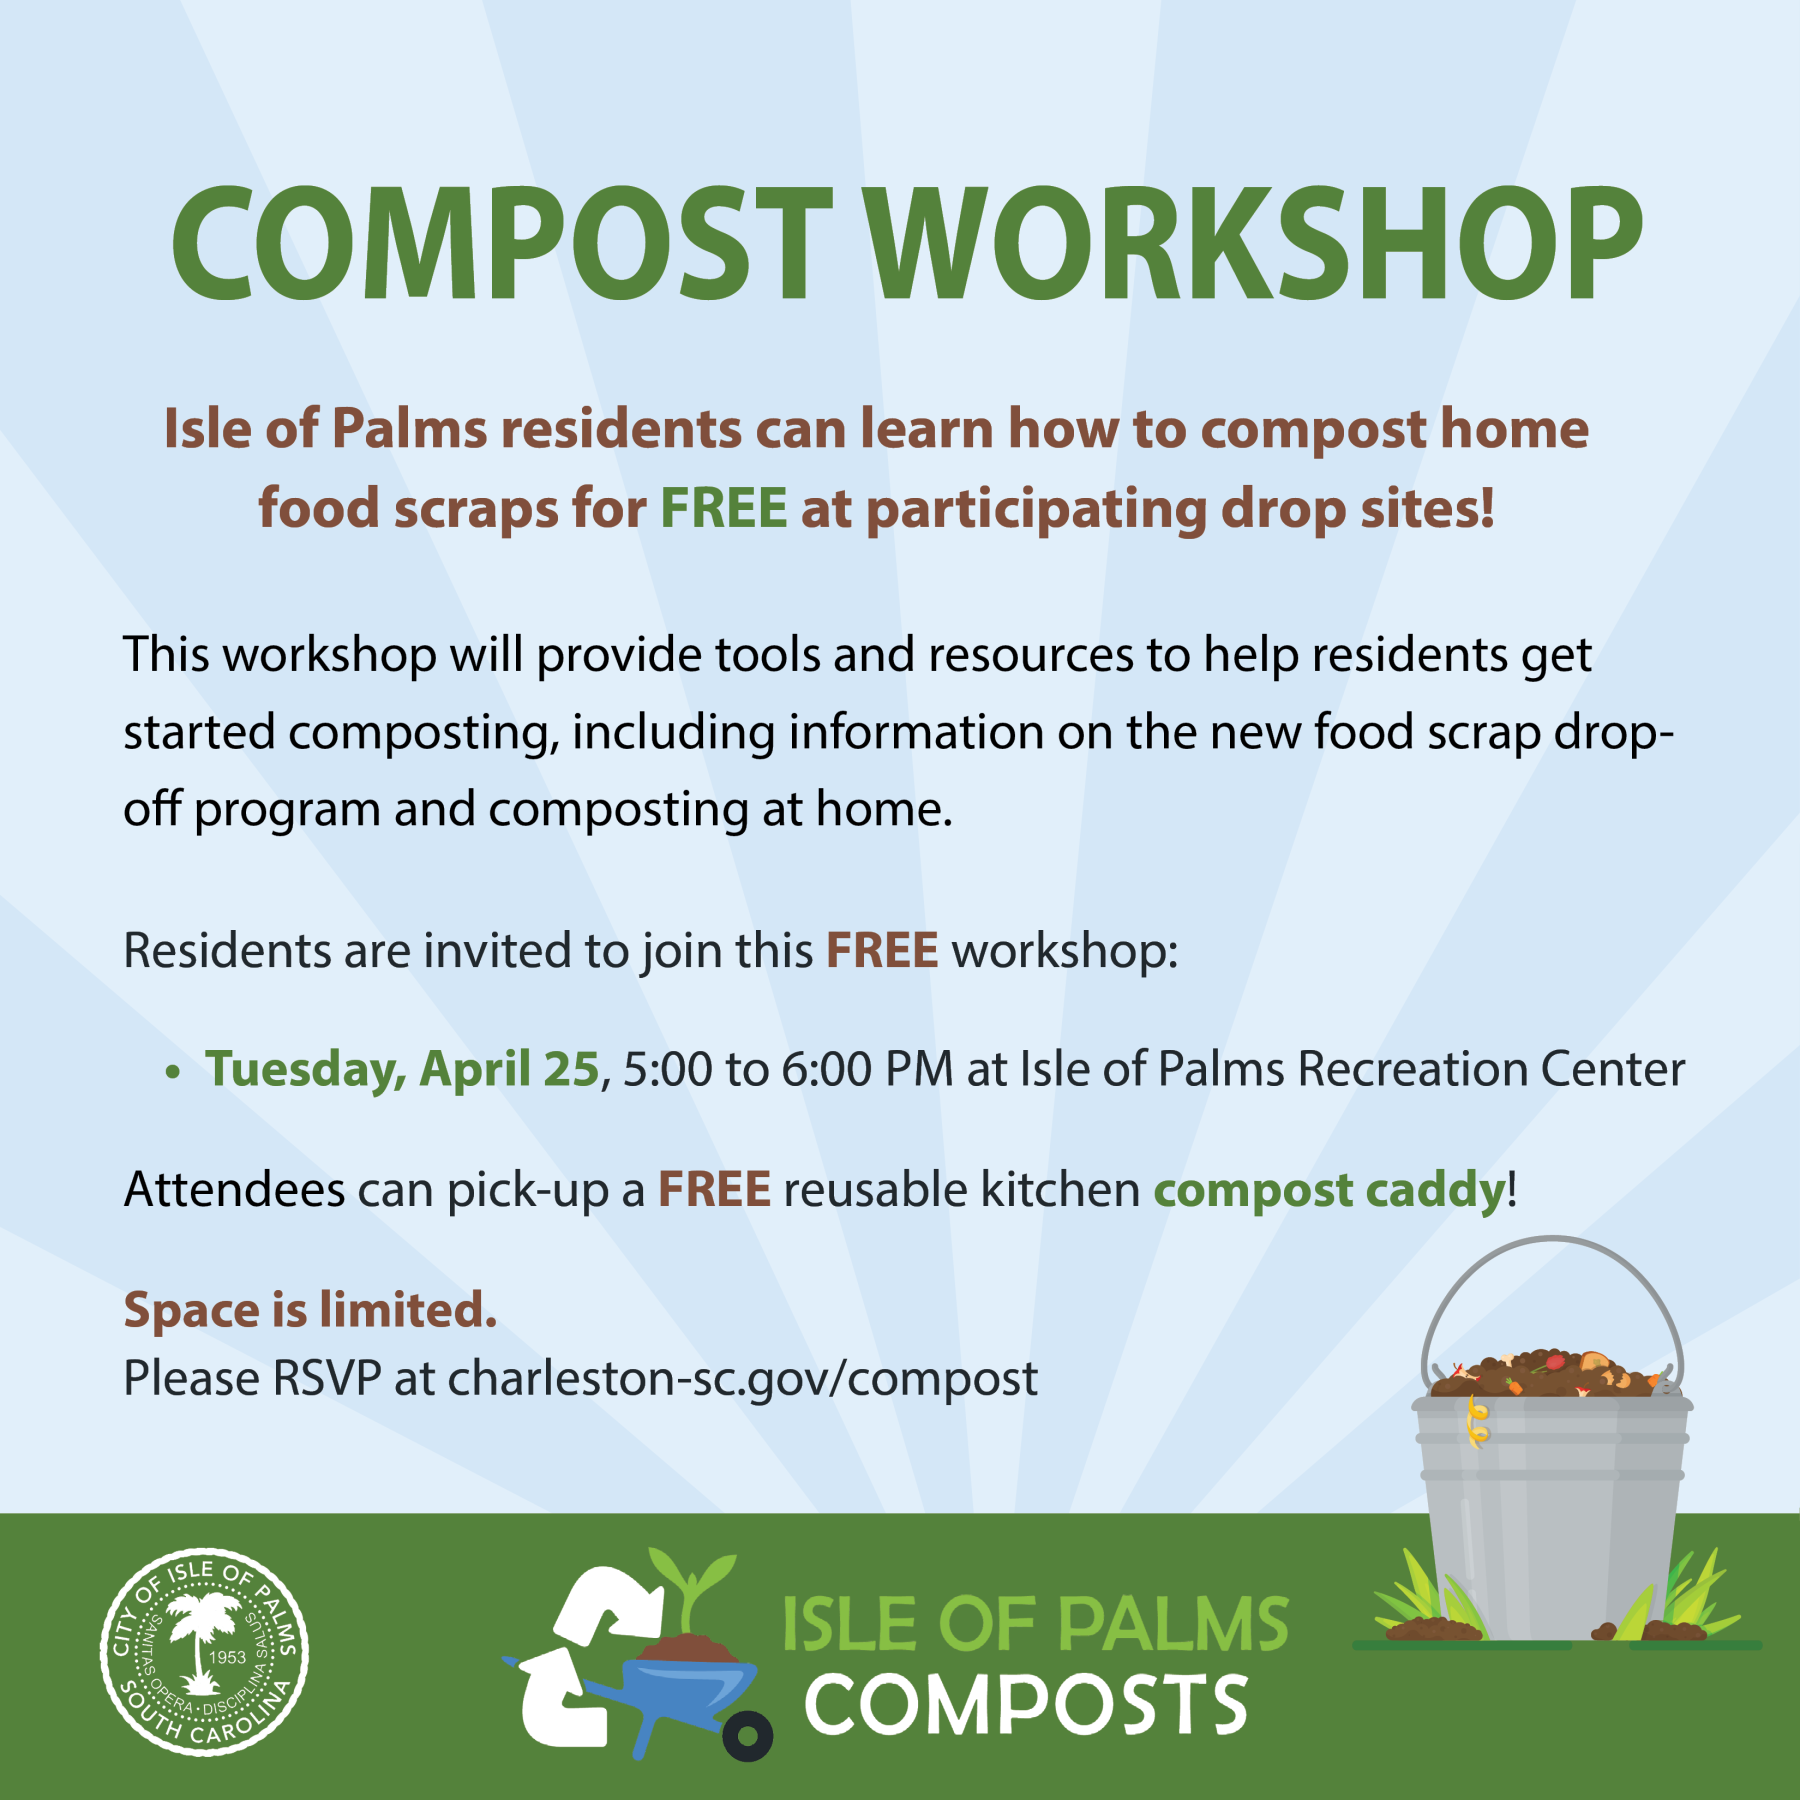 Free composting workshop at Isle of Palms Recreation Center 